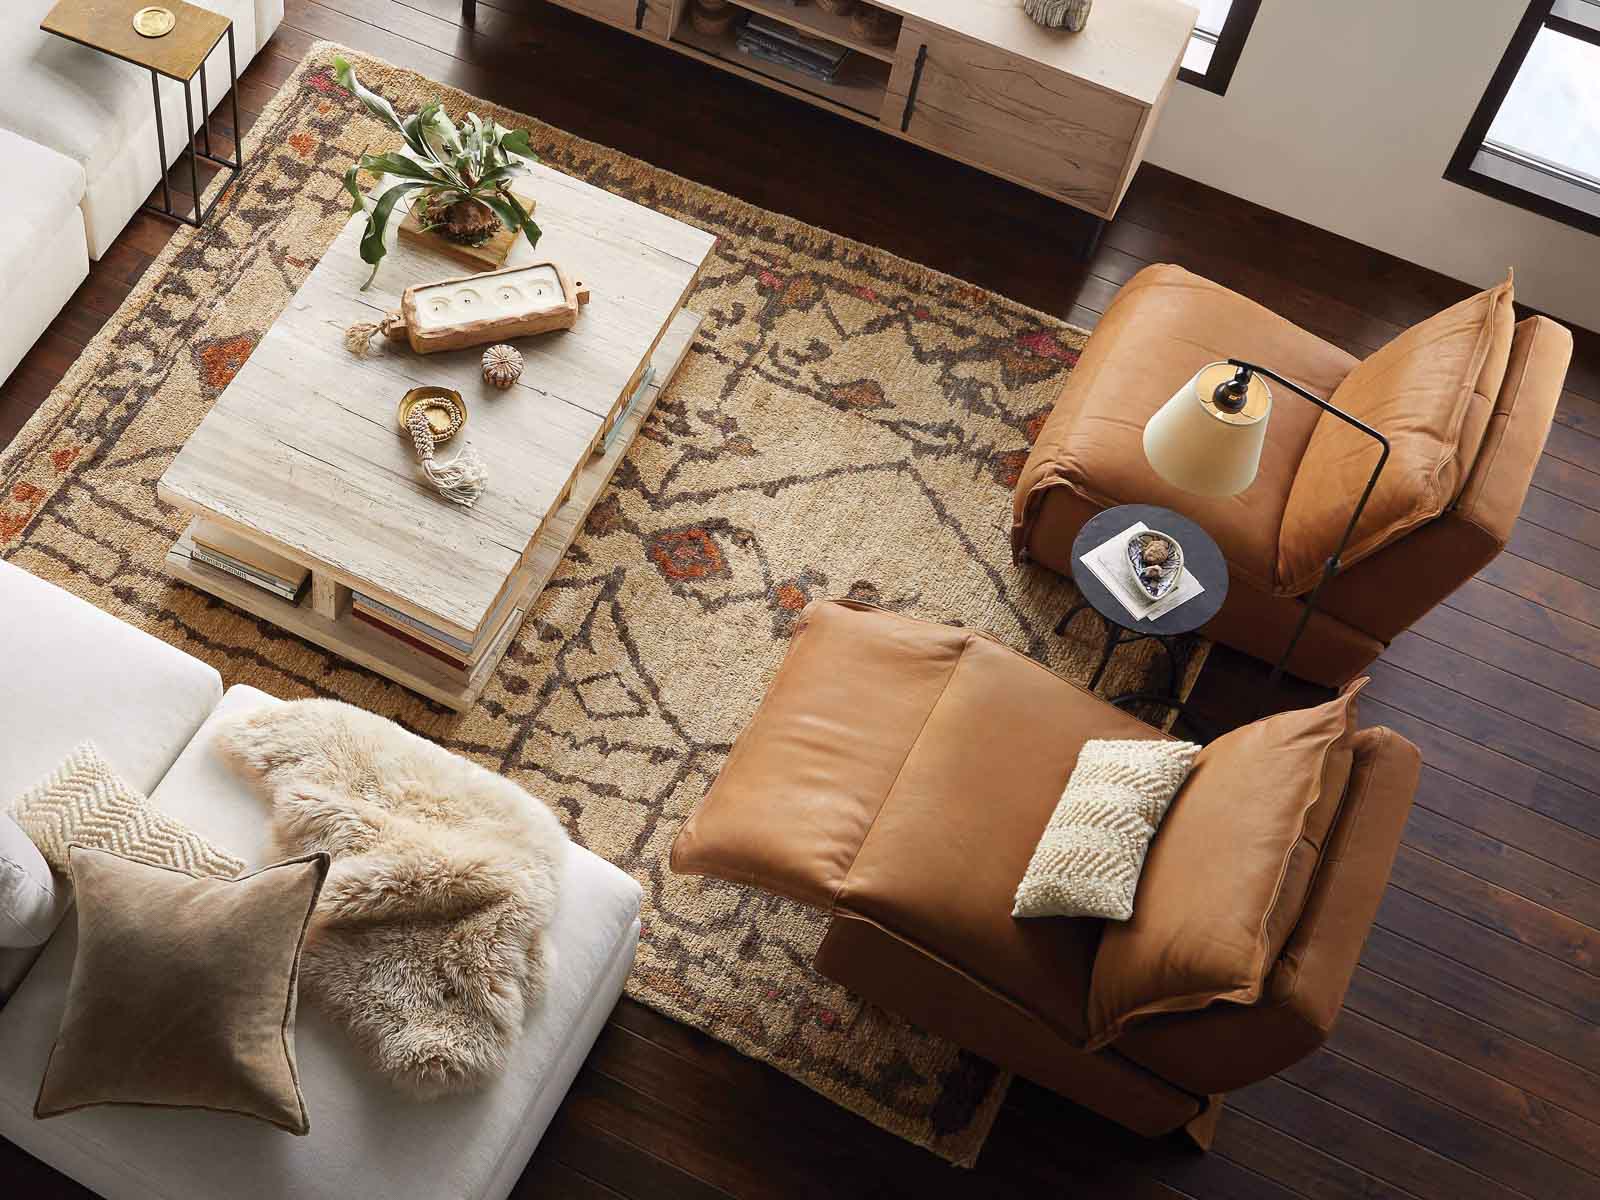 Two stylish leather recliners in a living room